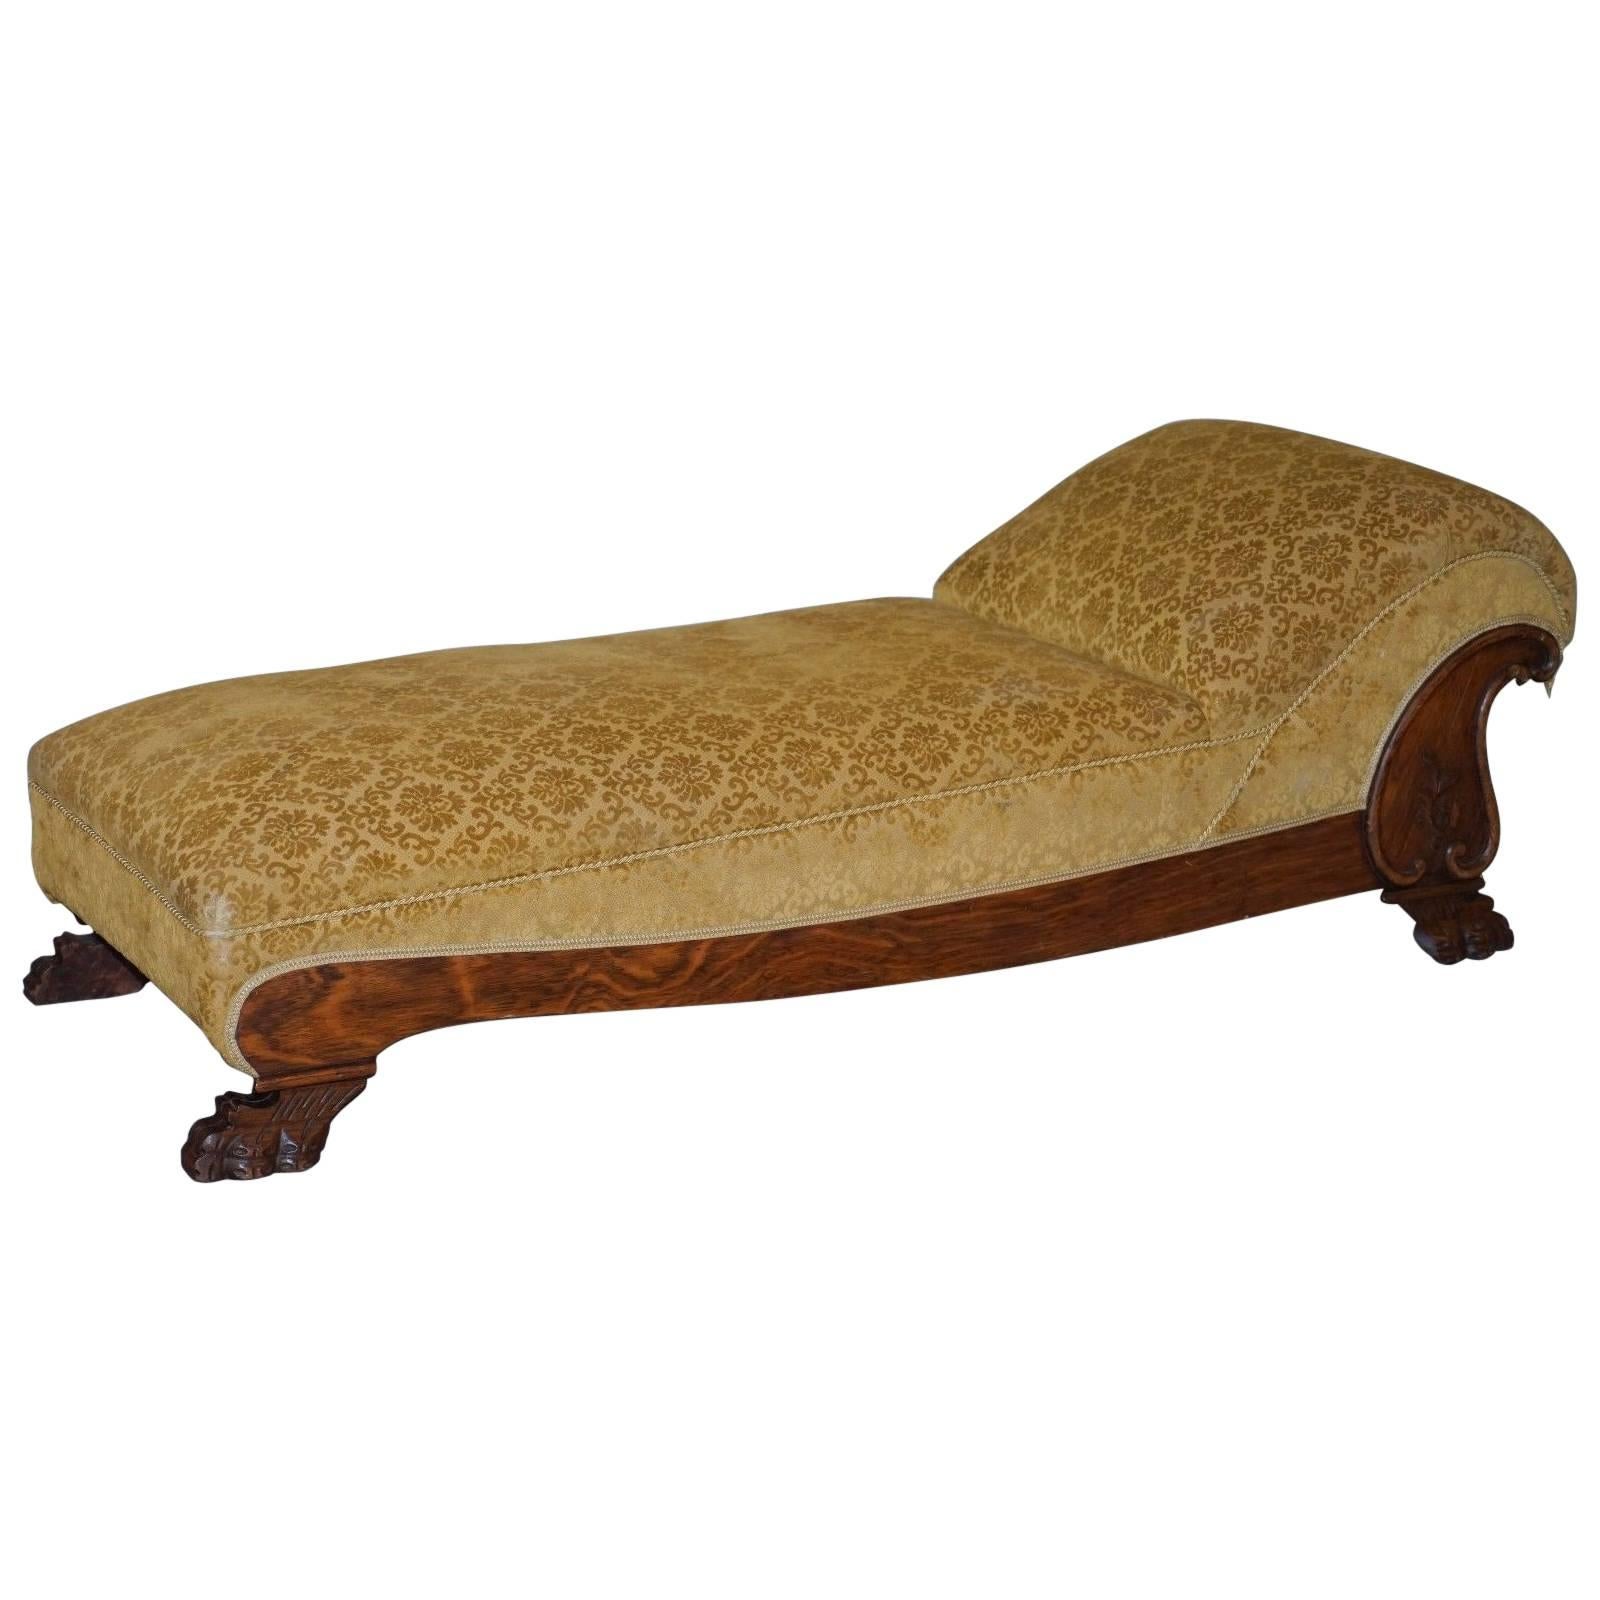 Regency Hand-Carved Rosewood Chaise Lounge Sofa, circa 1820